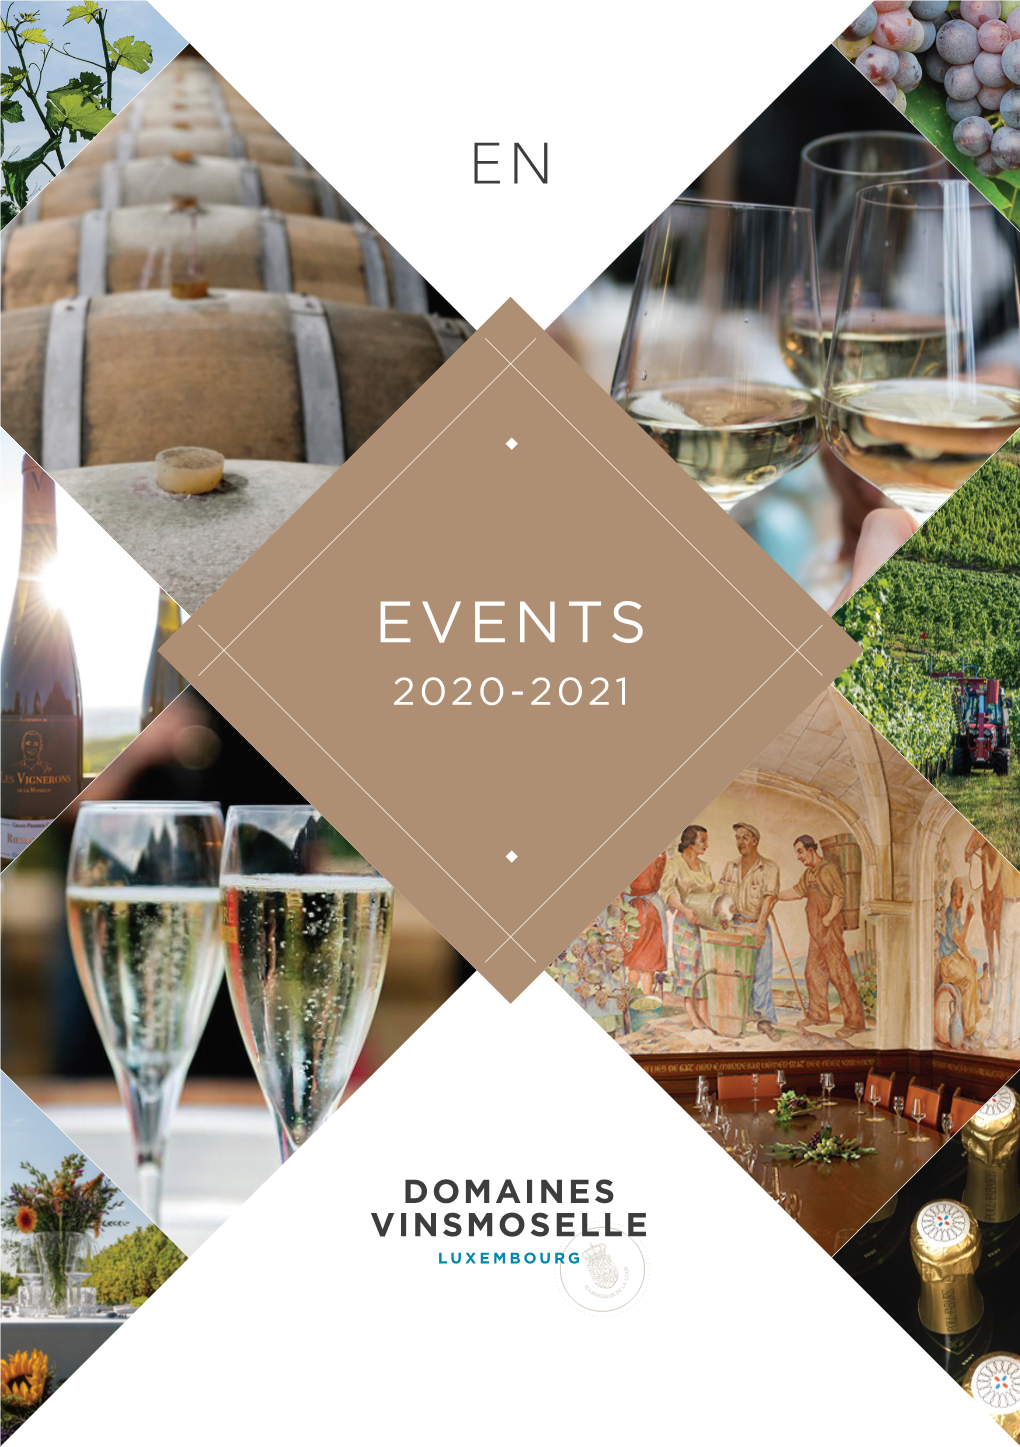 EVENTS 2020-2021 Domaines Vinsmosellewelcome! Is the First and Largest Producer of Luxembourg Wines and Crémants